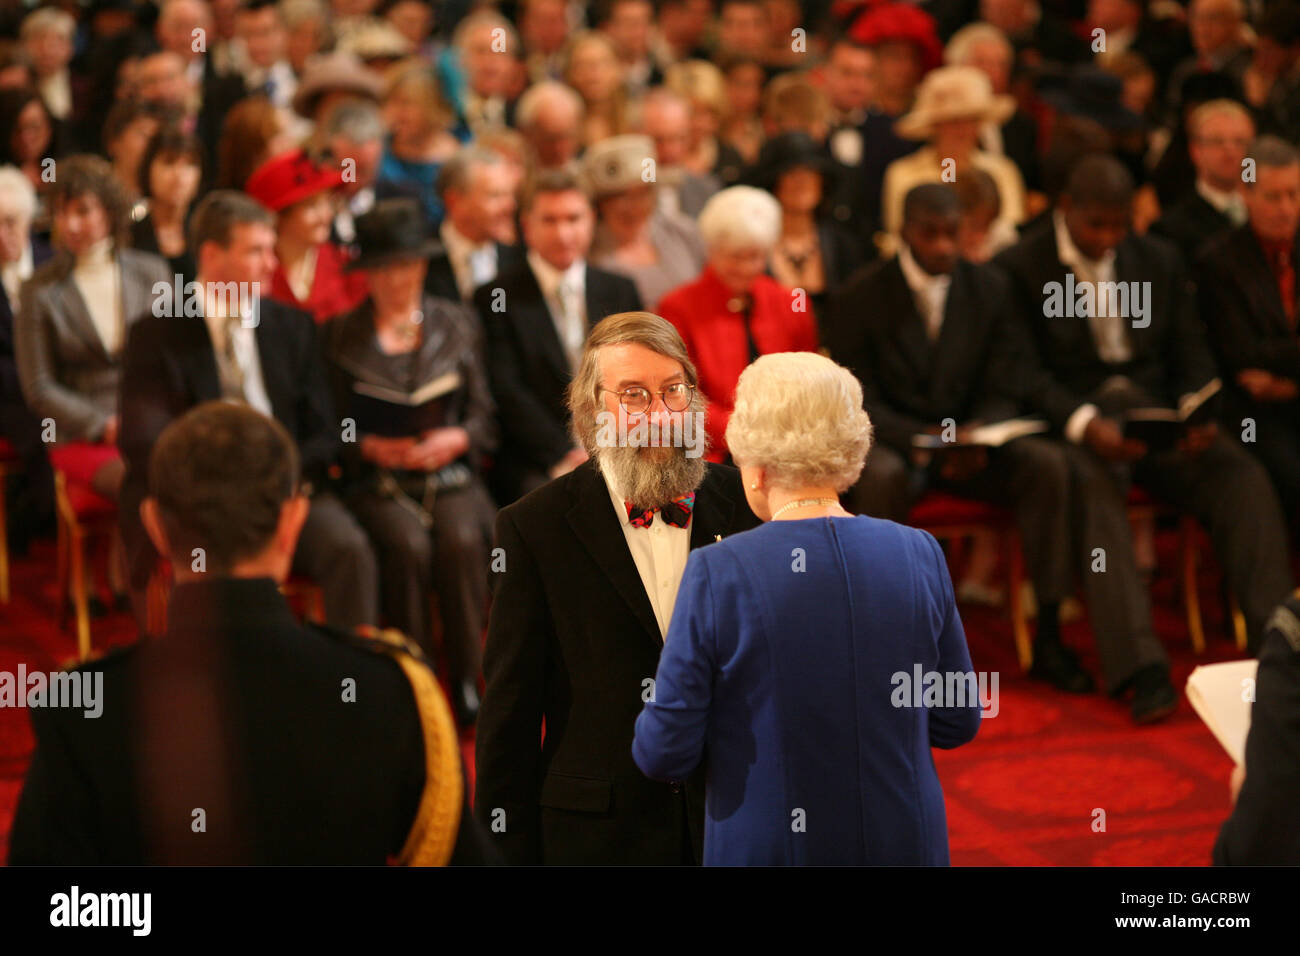 Mr. Desmond Pawson, from Ipswich, is made an MBE by The Queen at Buckingham Palace. Stock Photo